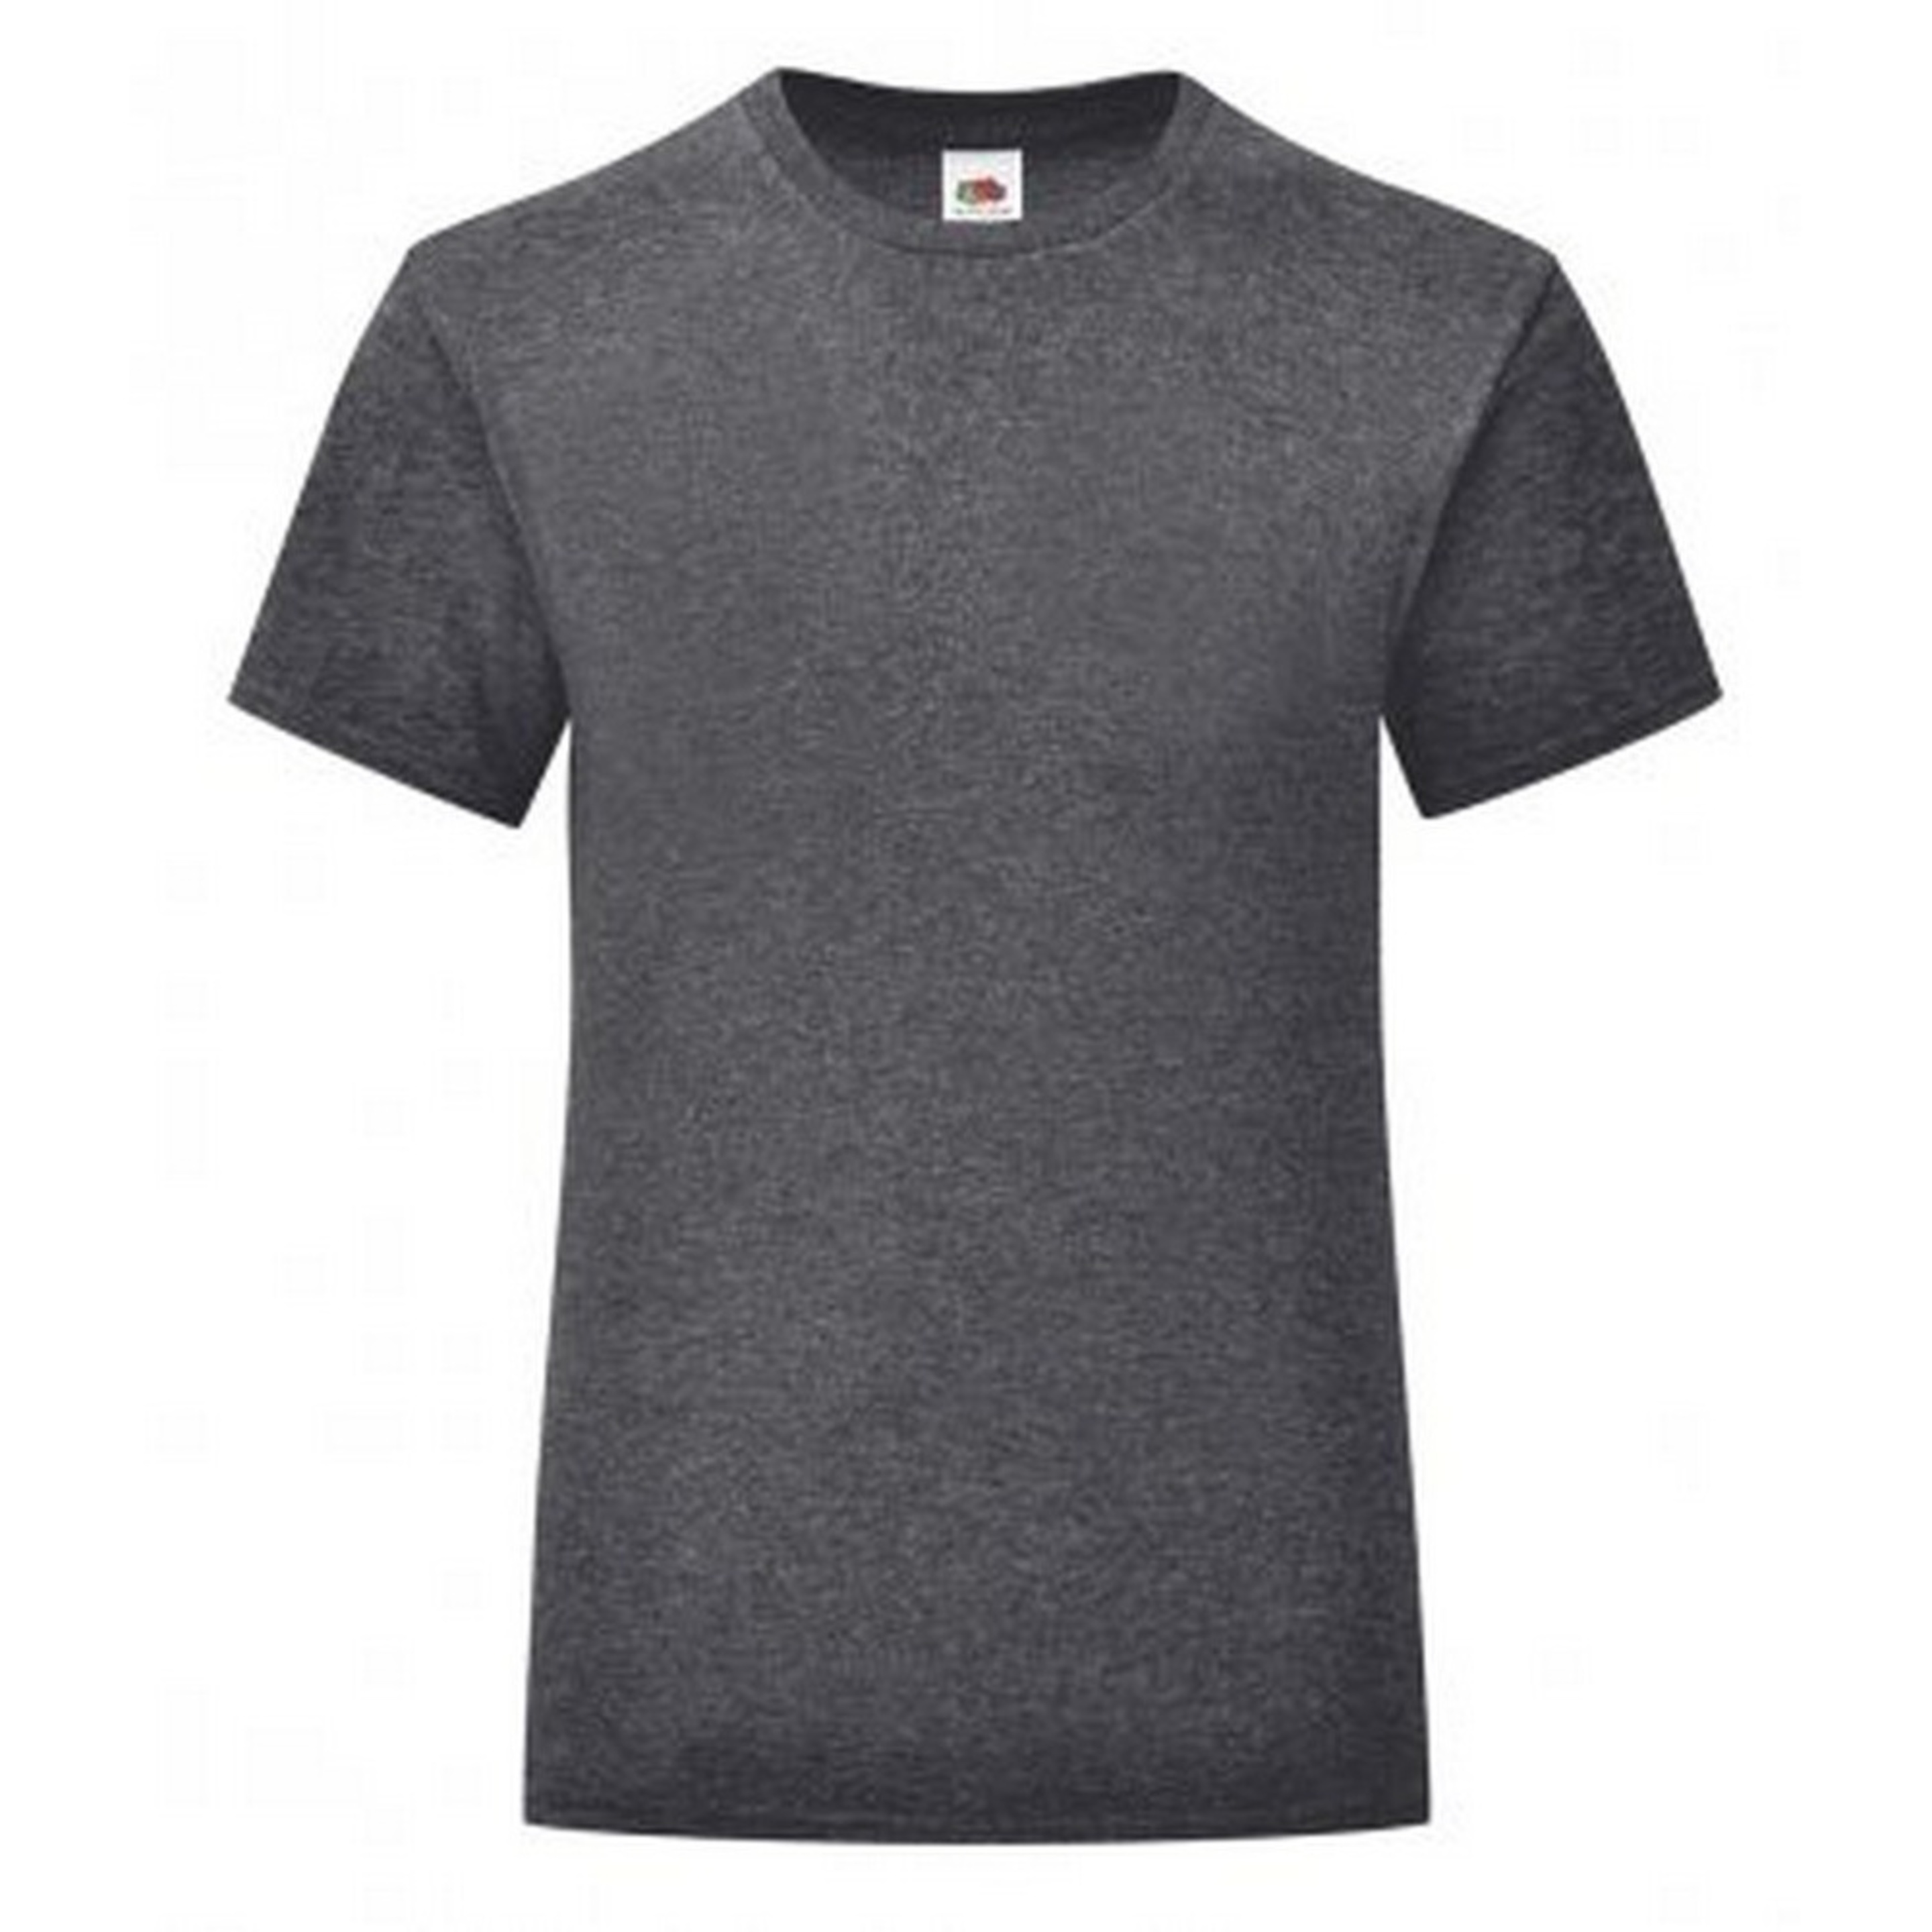 T-shirt Iconic Fruit Of The Loom - gris-oscuro - 